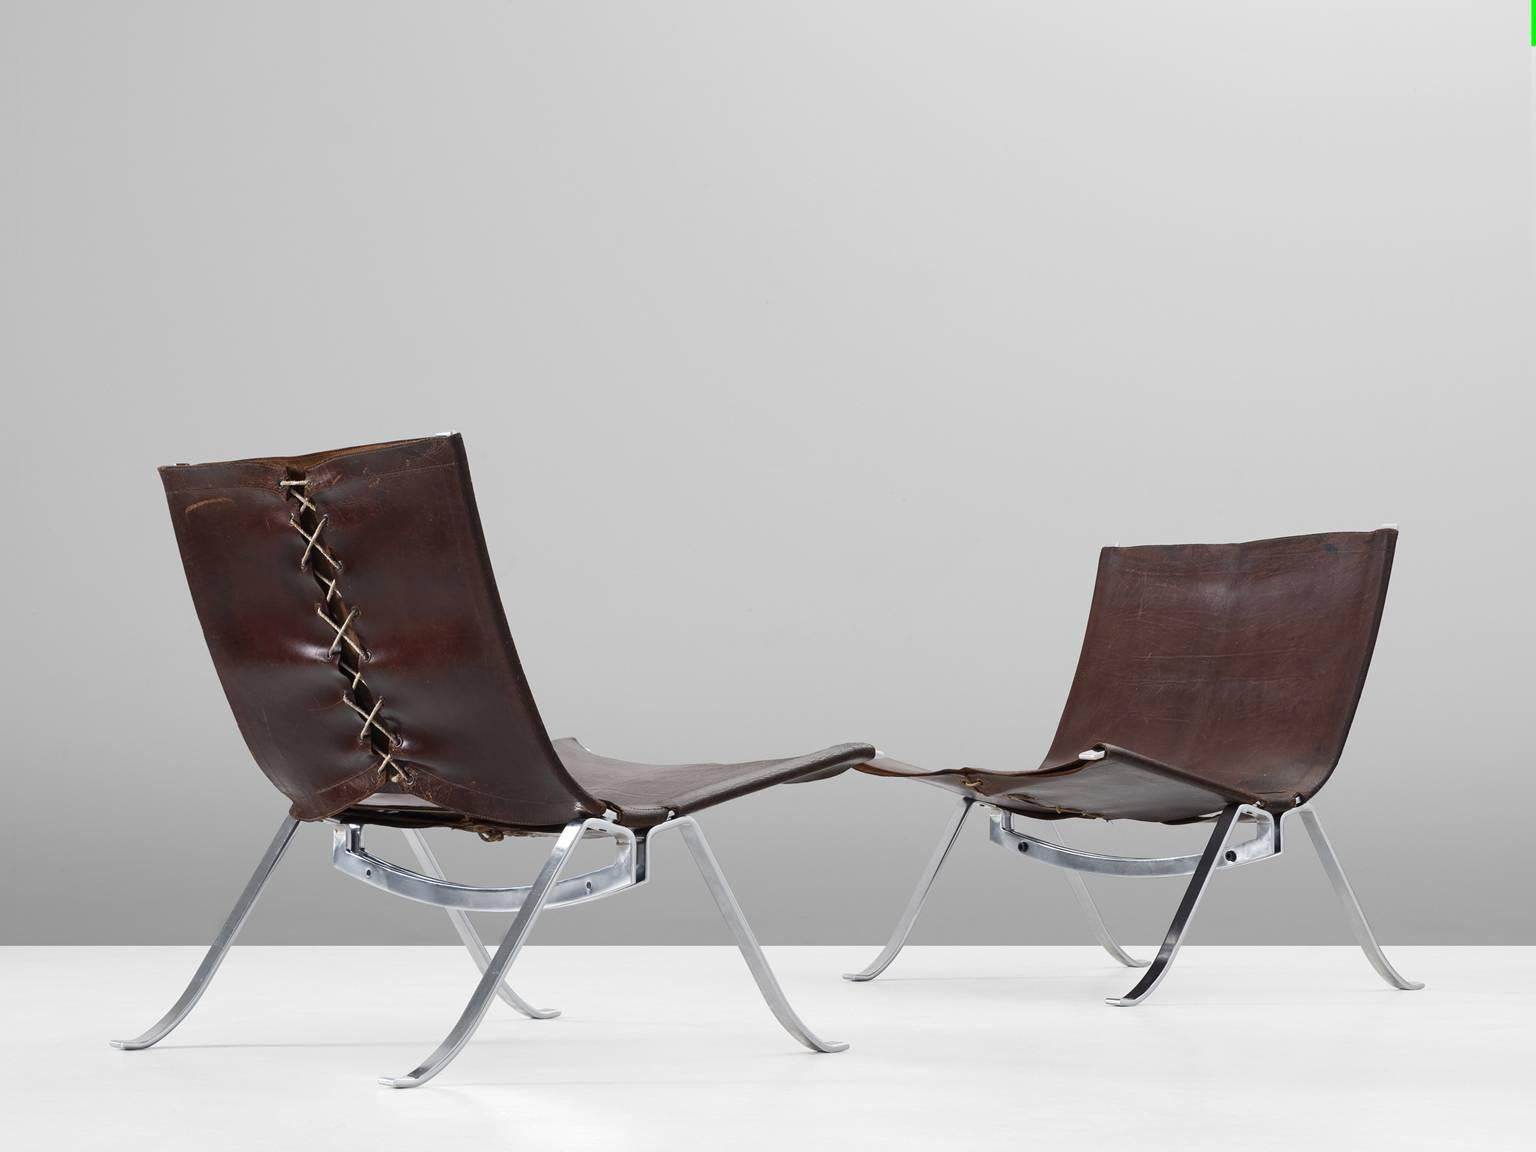 Easy chairs, in brushed metal and leather, by Preben Fabricius for Arnold Exclusiv, Denmark, 1971. 

A pair of lounge chairs by Preben Fabricius. Rare to find as a set of two with original leather upholstery. The very well formed brushed steel